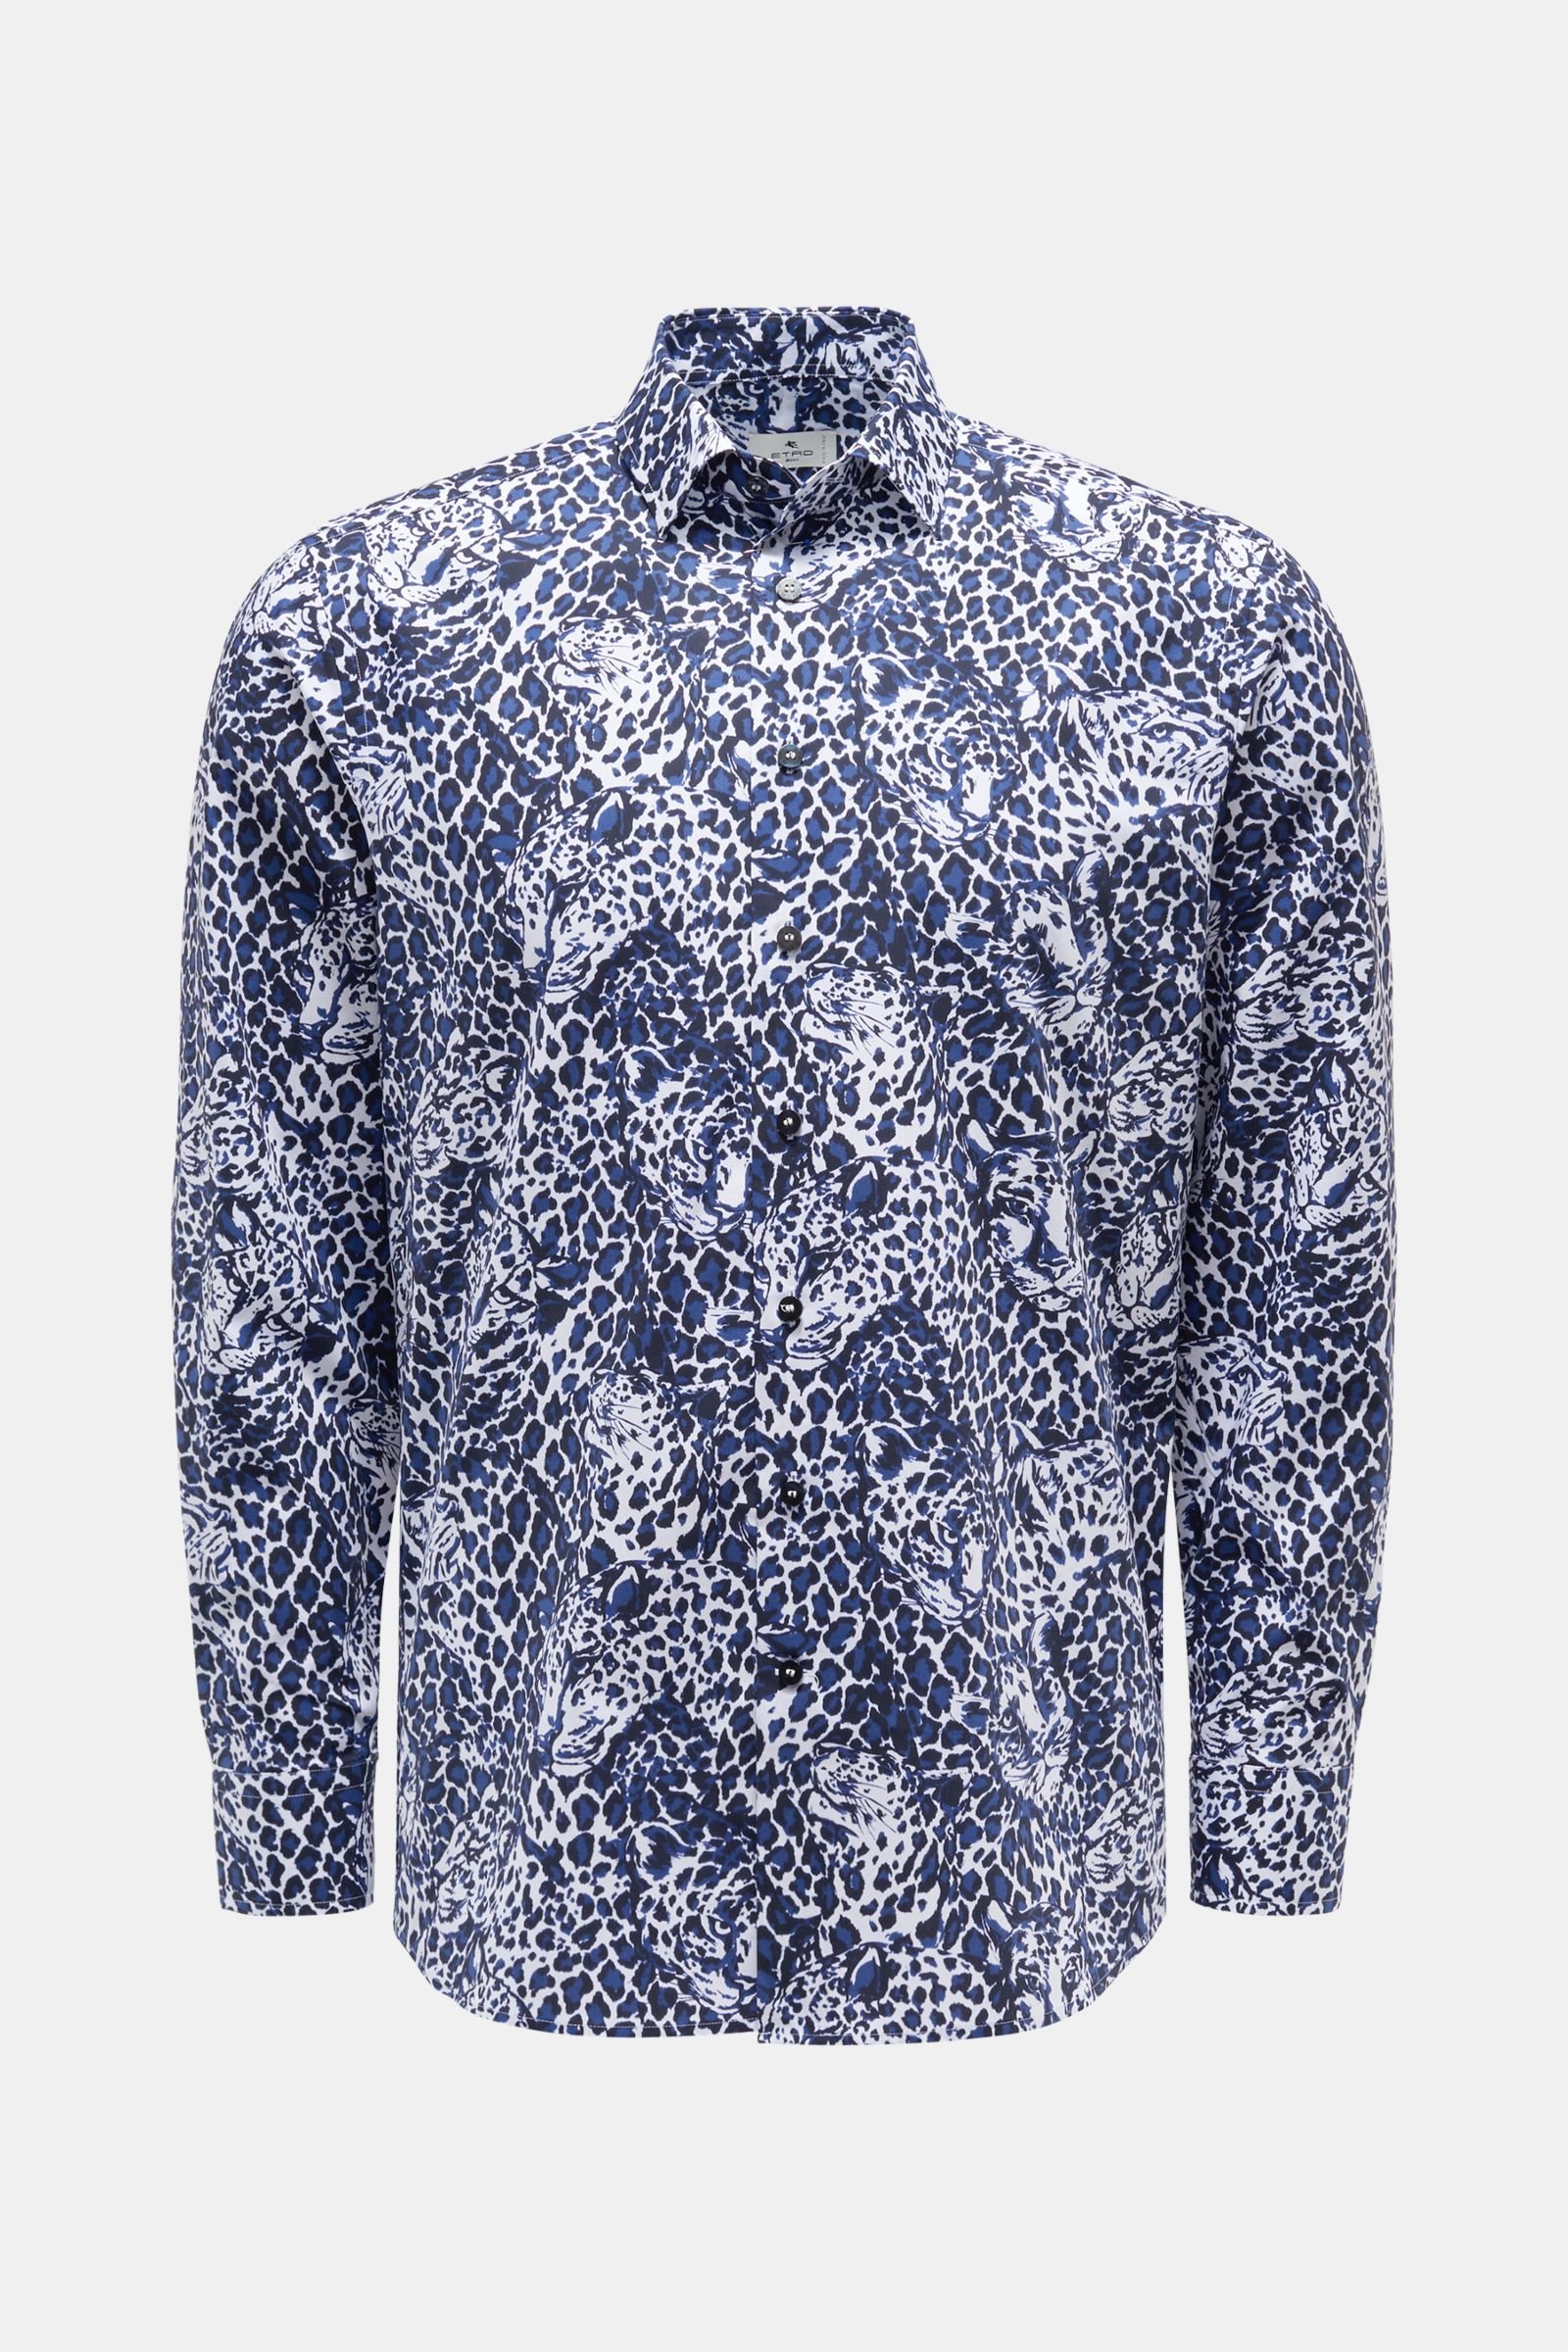 Casual shirt narrow collar navy/white patterned